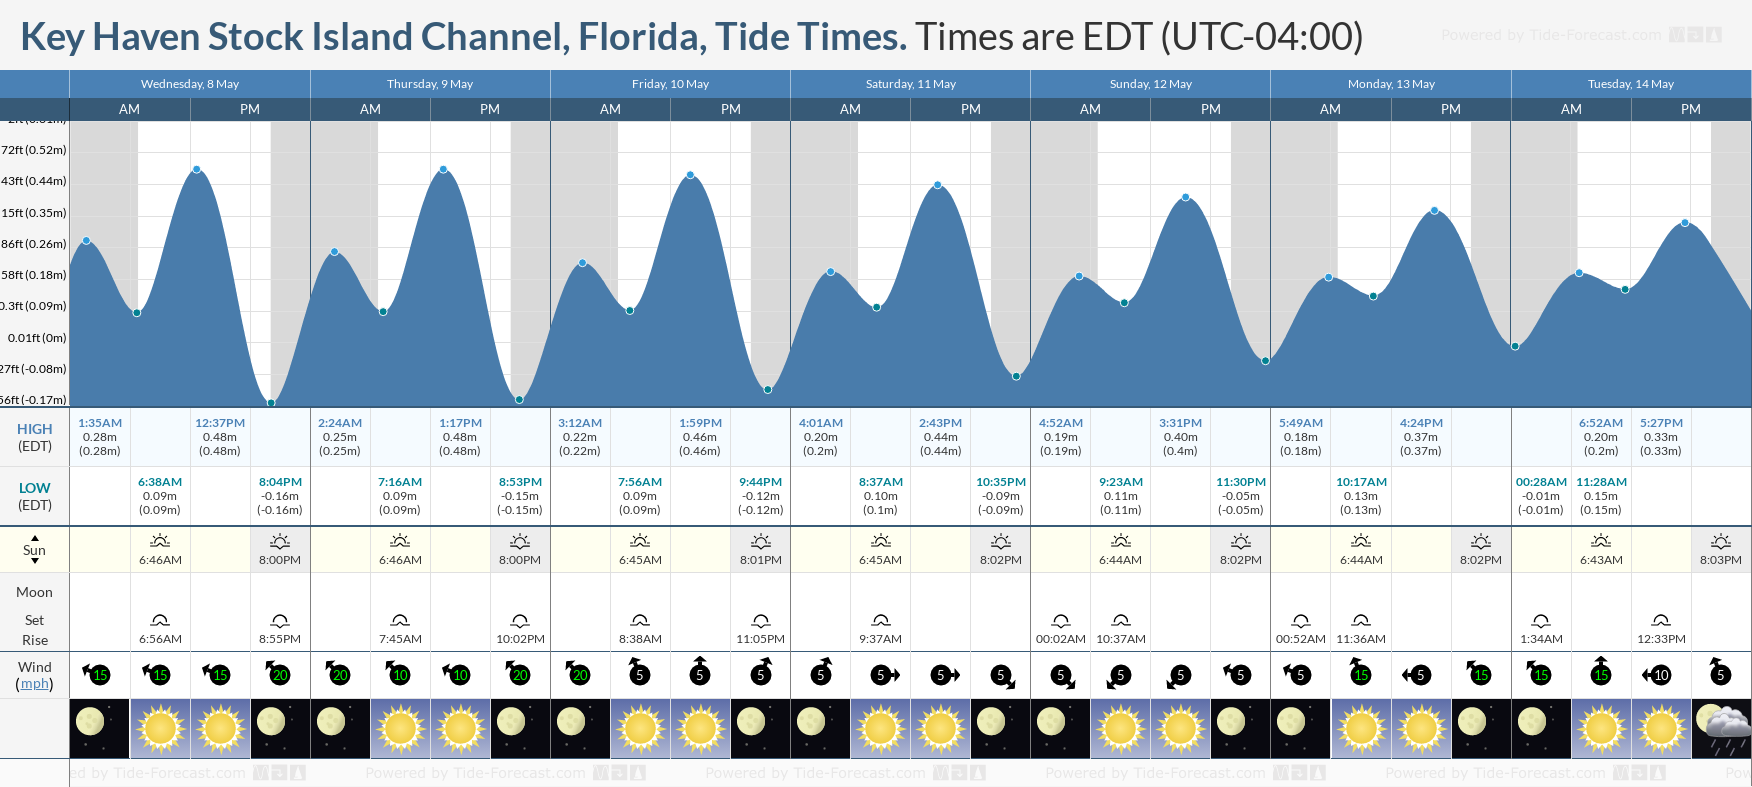 Key Haven Stock Island Channel, Florida Tide Chart including high and low tide tide times for the next 7 days